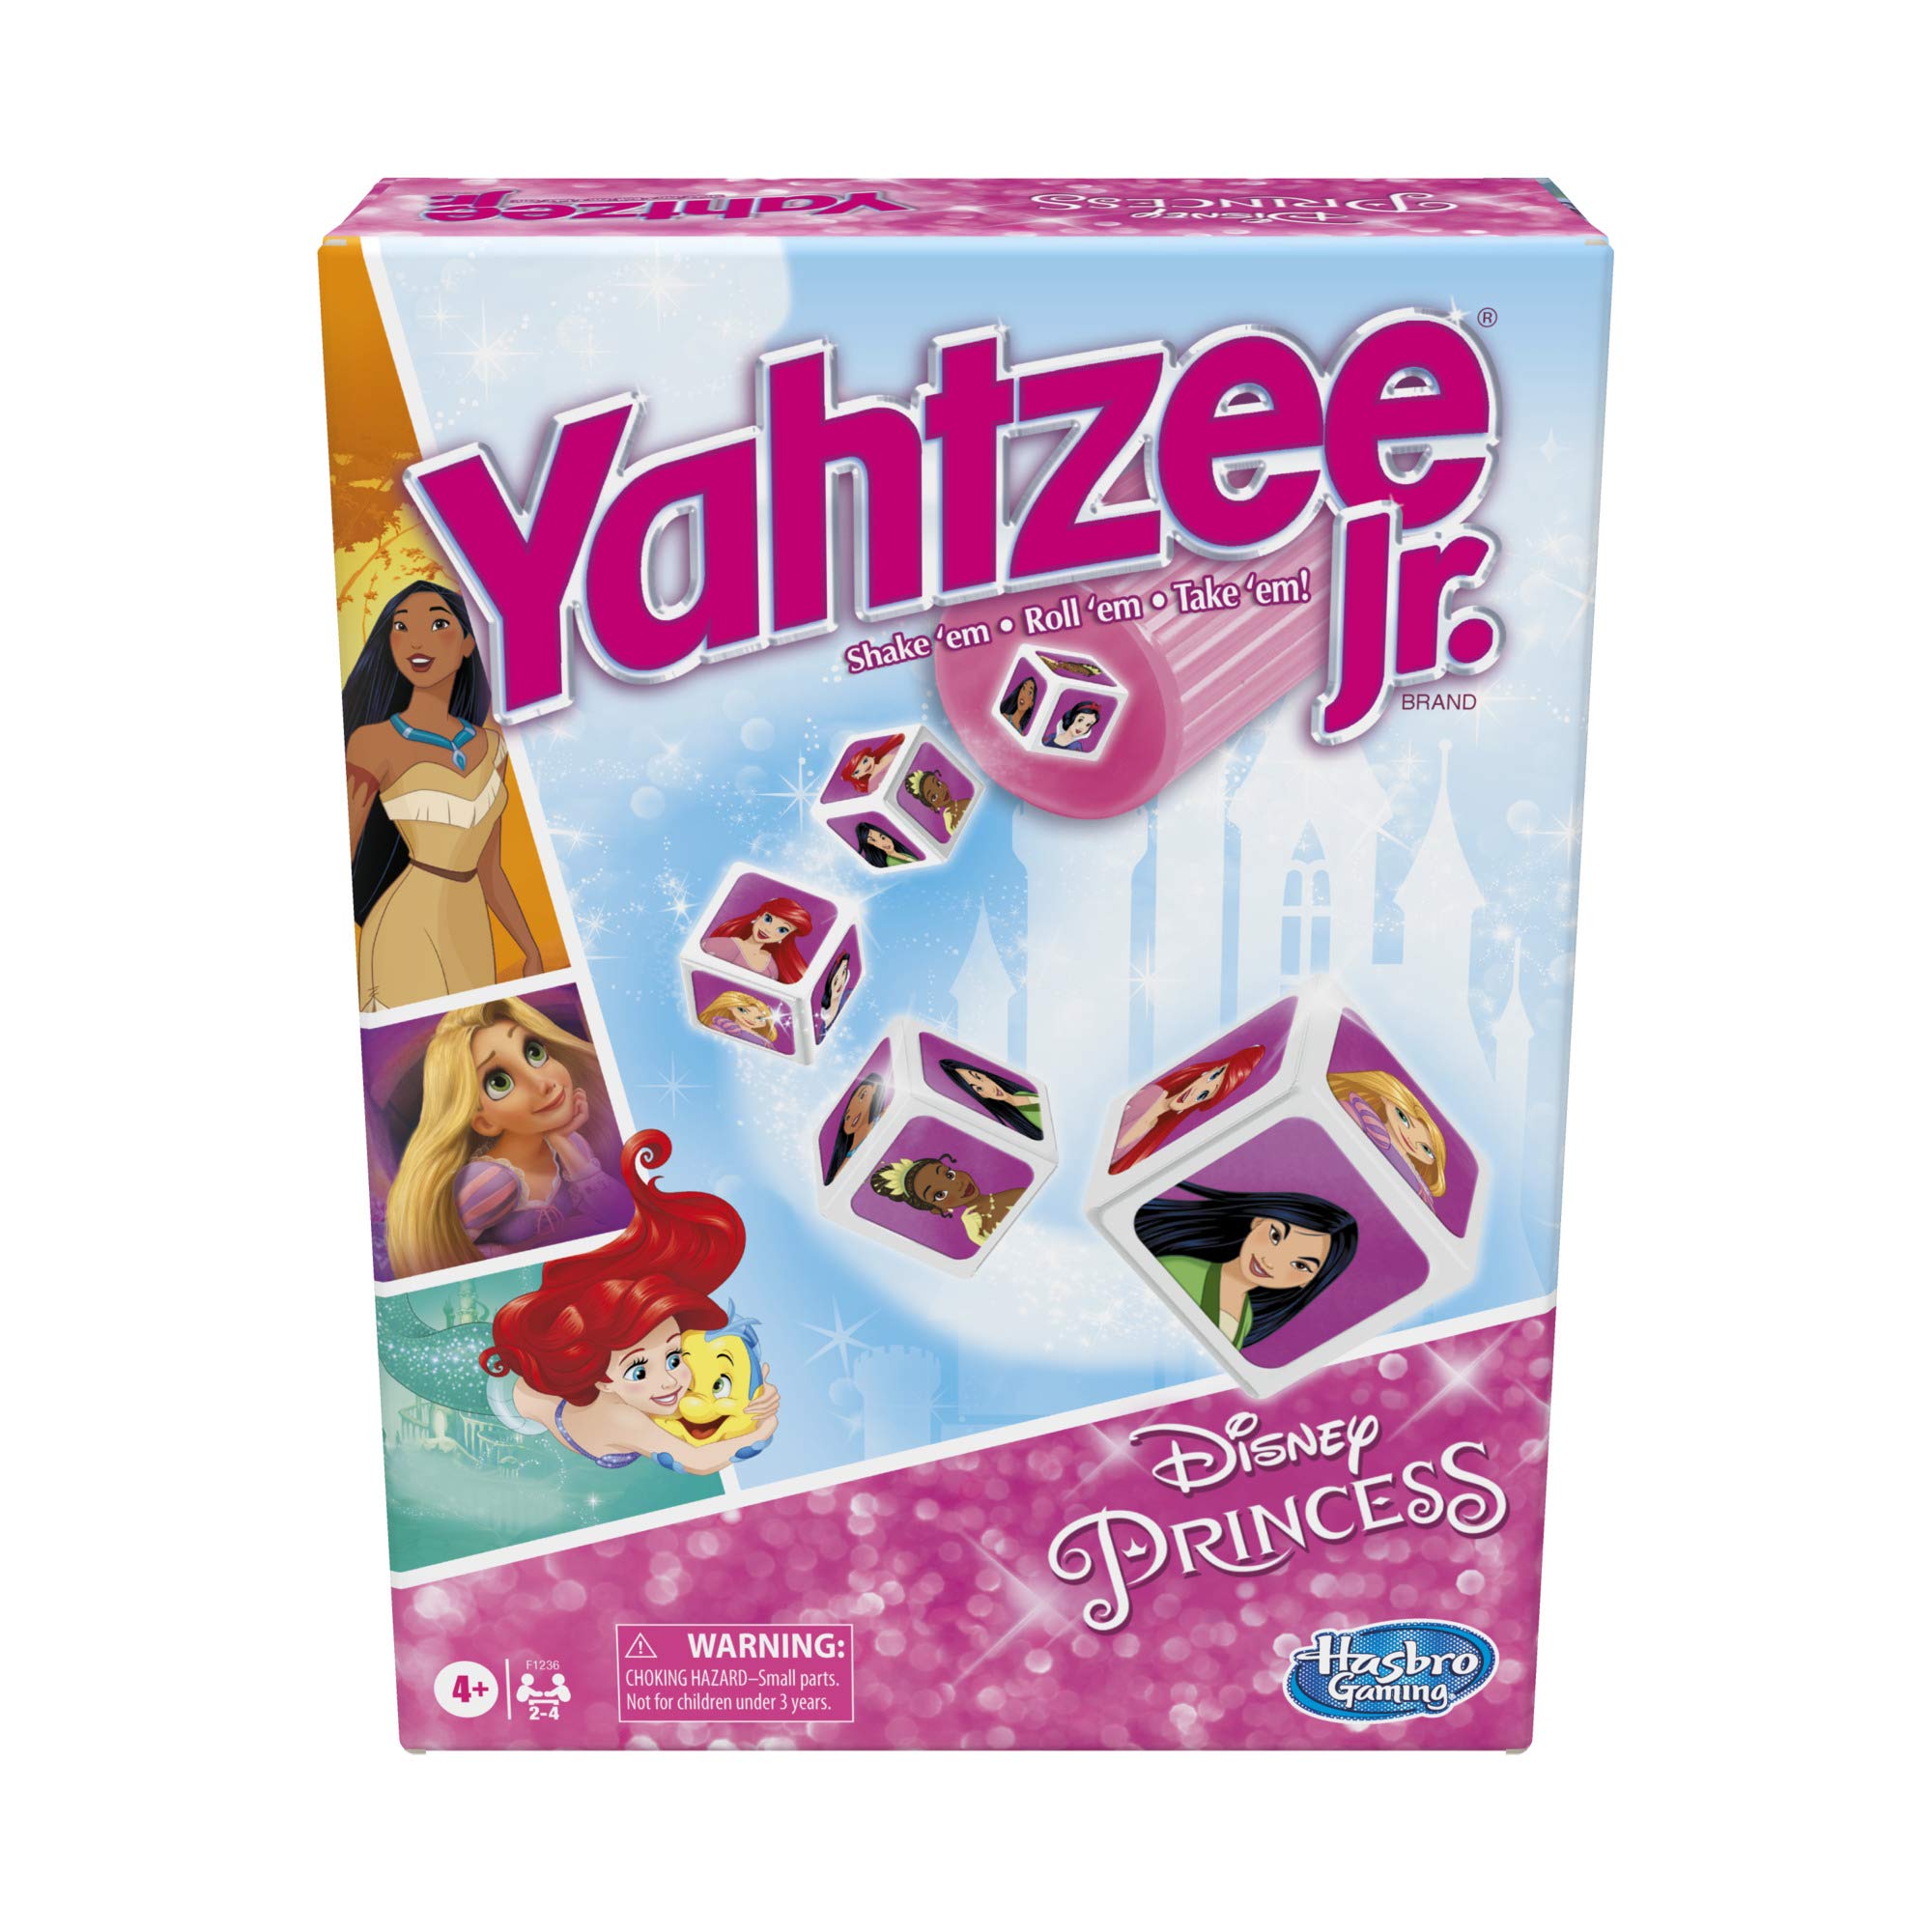 Yahtzee Jr.: Disney Princess Edition Board Game for Kids Ages 4 and Up, for 2-4 Players, Counting and Matching Game for Preschoolers (Amazon Exclusive)